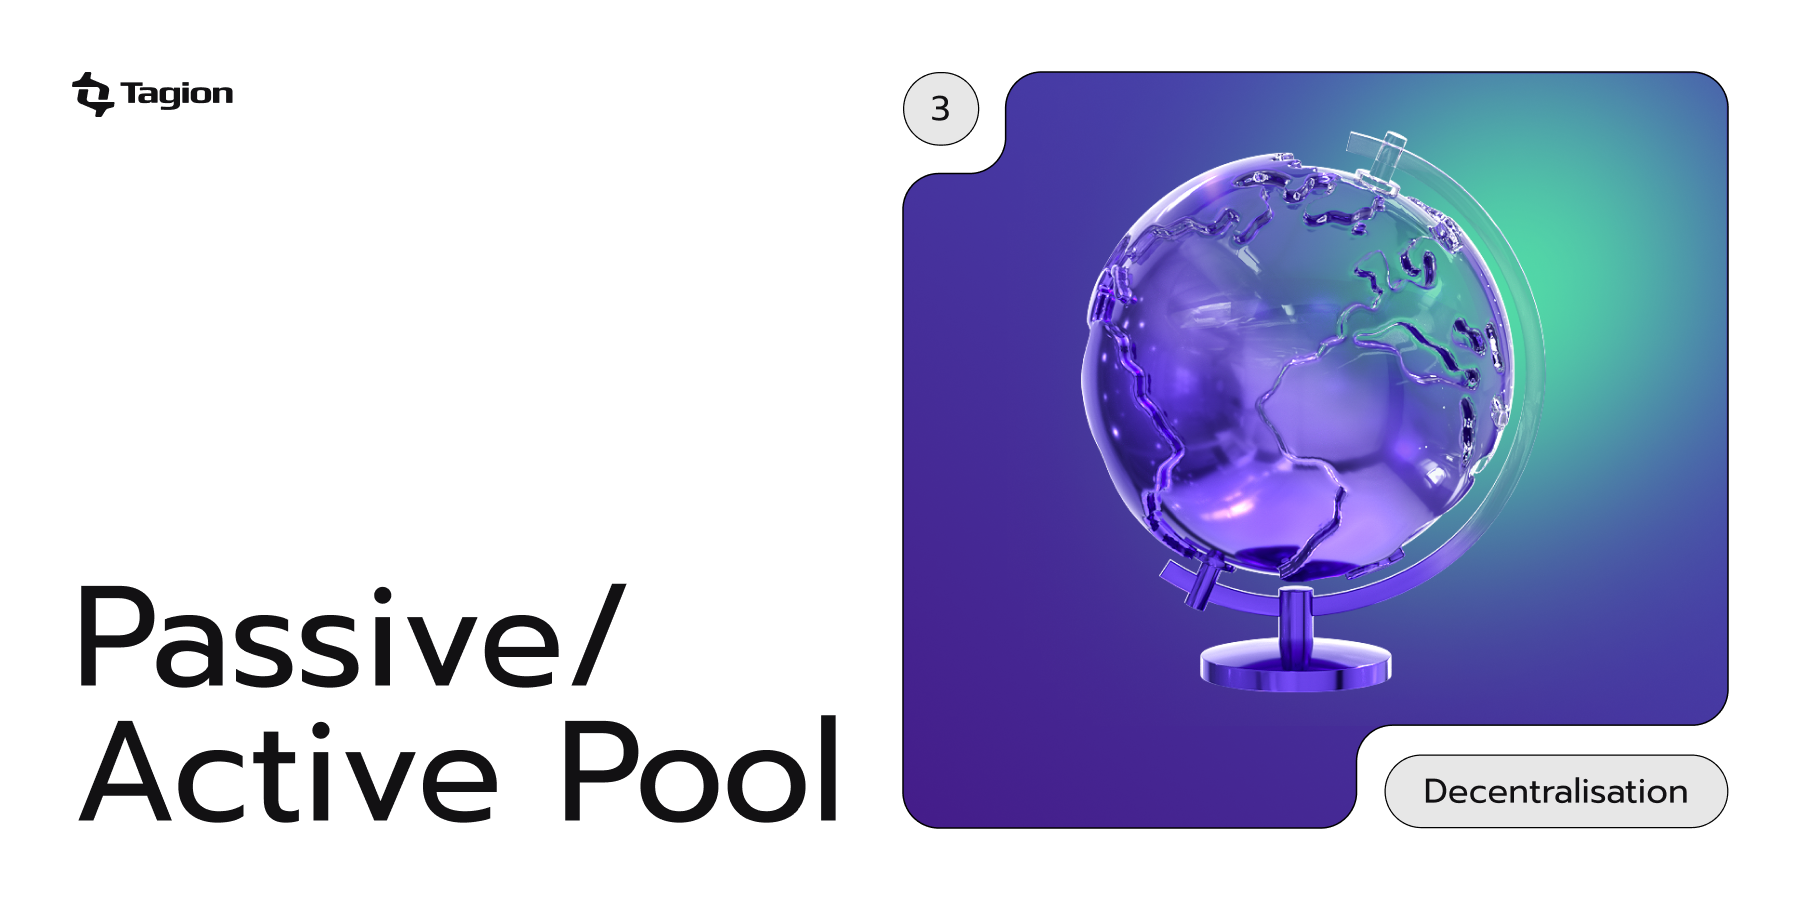 passive and active pool image